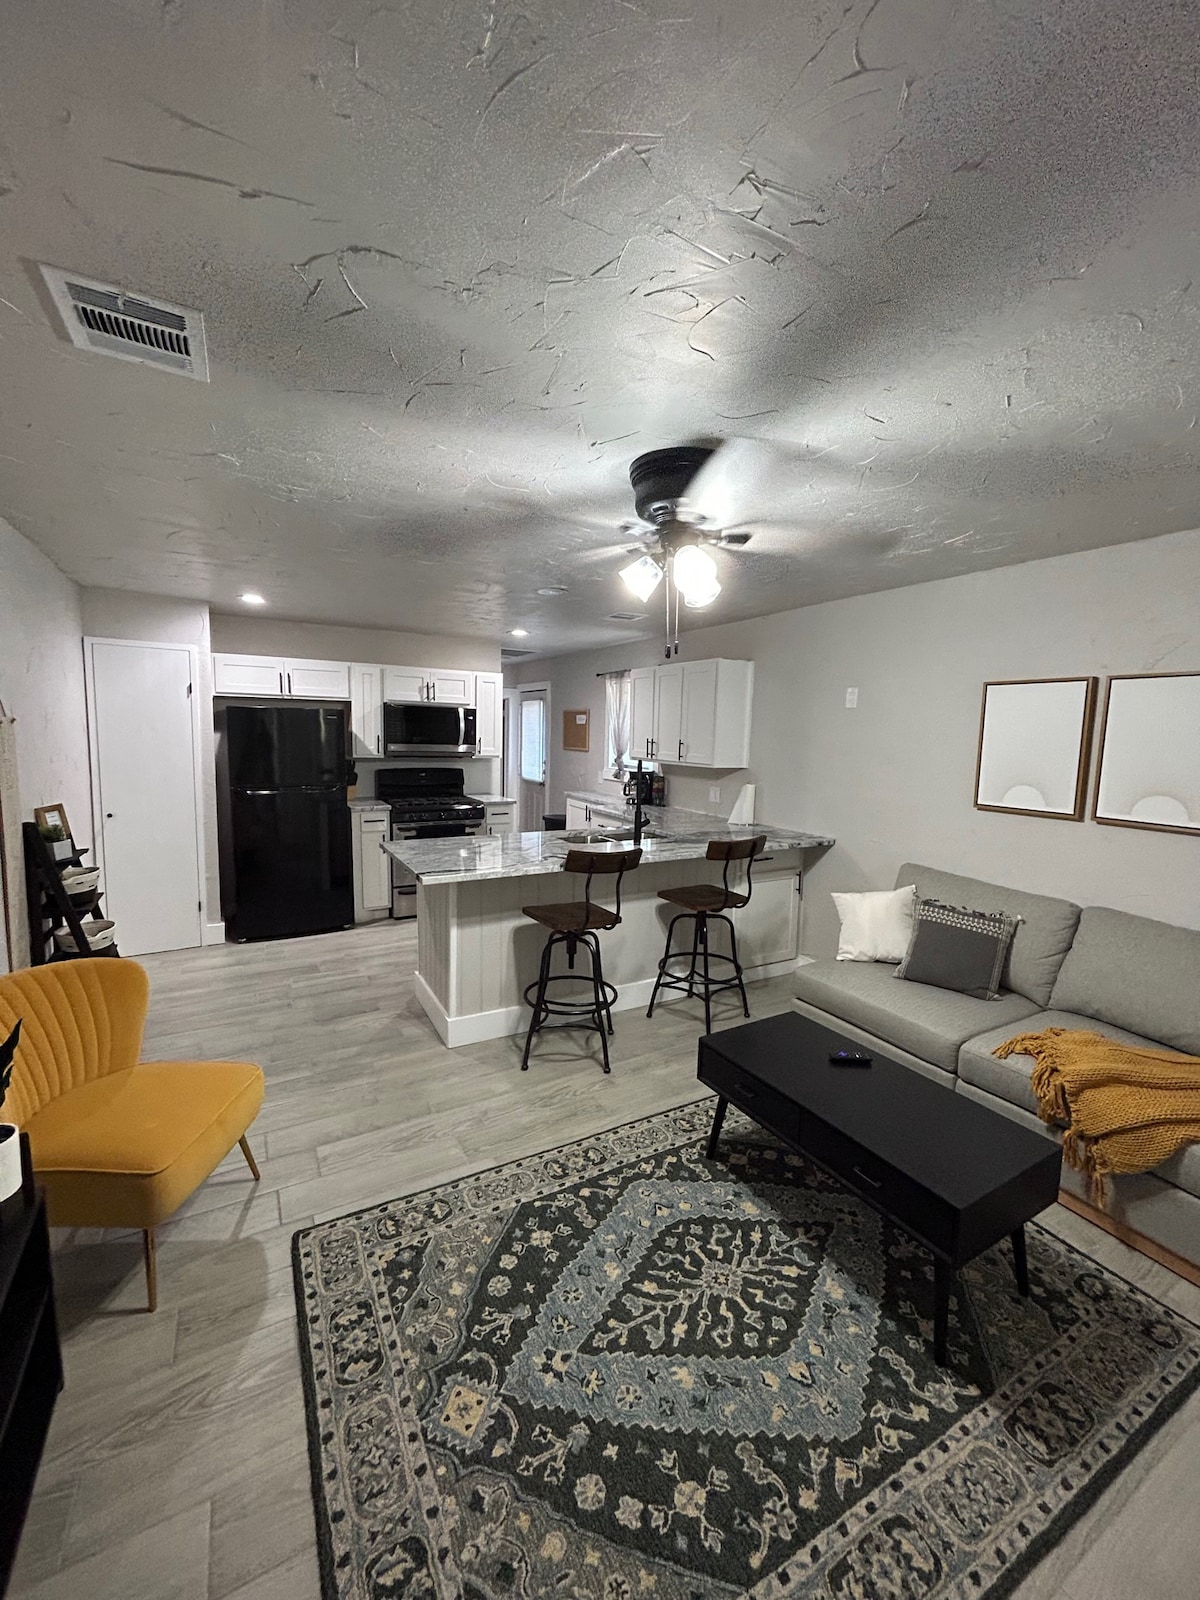 A Remodeled Home 2 min to Stockyards & Much More